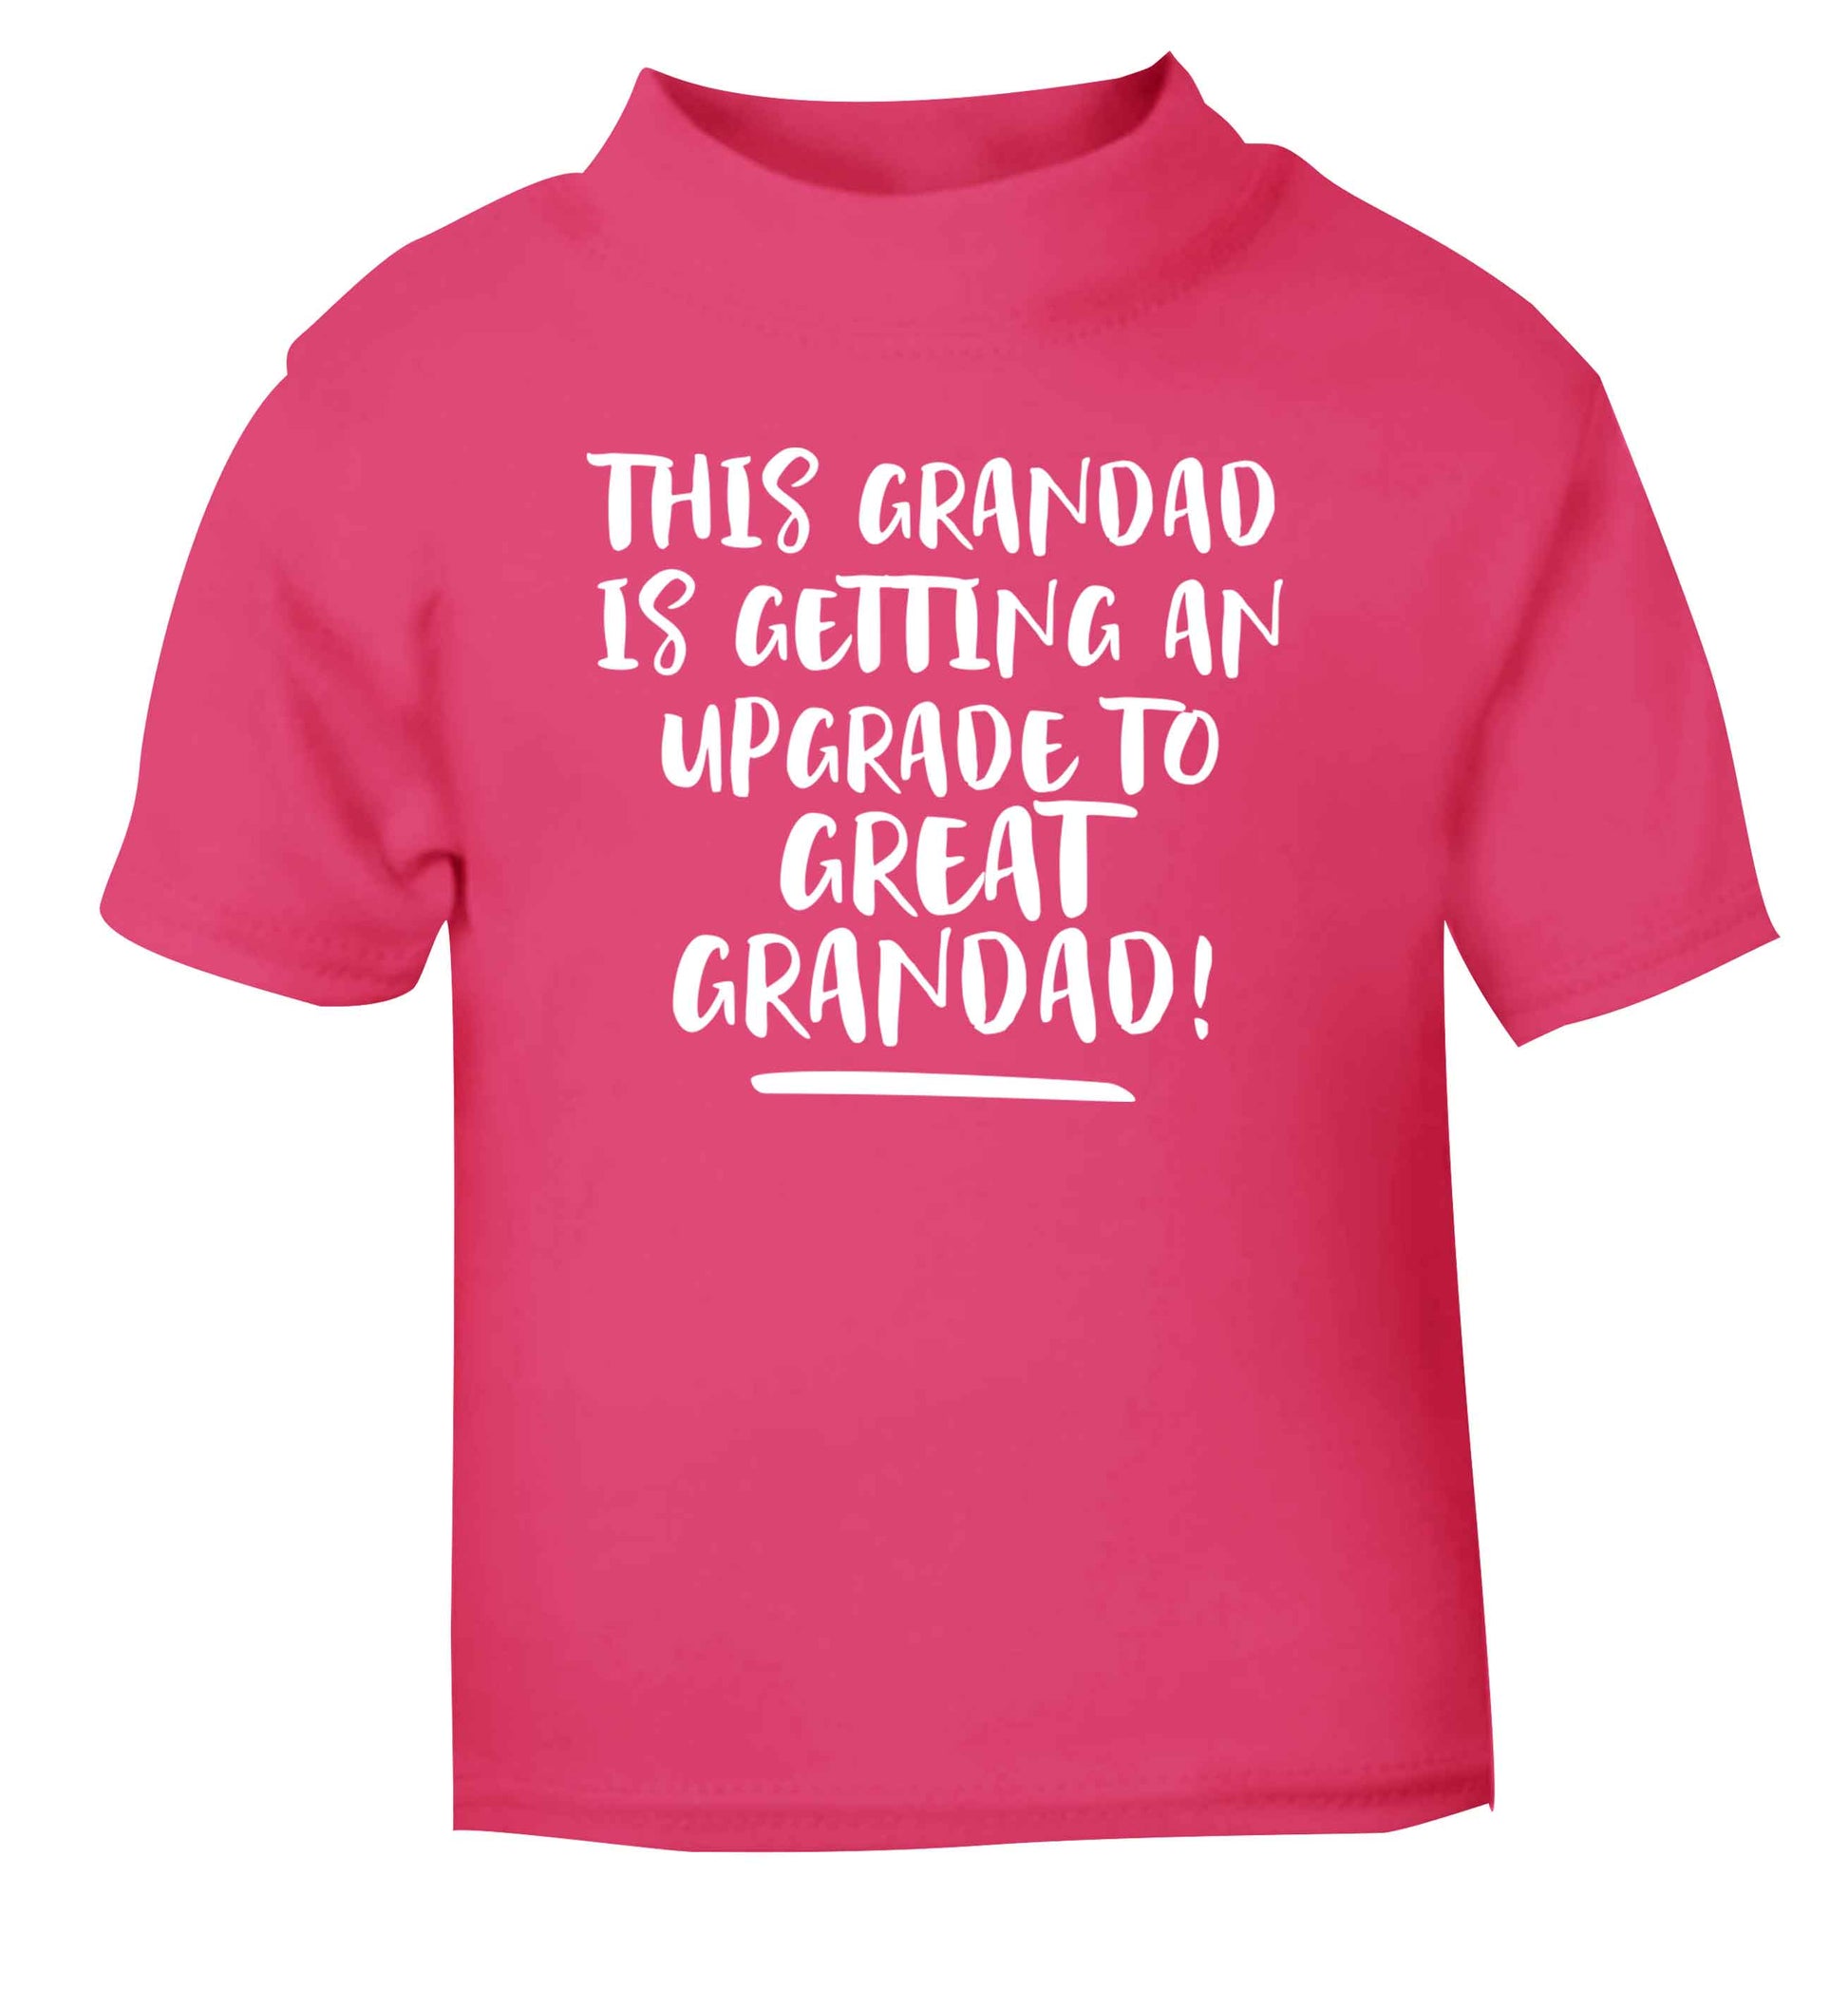 This grandad is getting an upgrade to great grandad! pink Baby Toddler Tshirt 2 Years